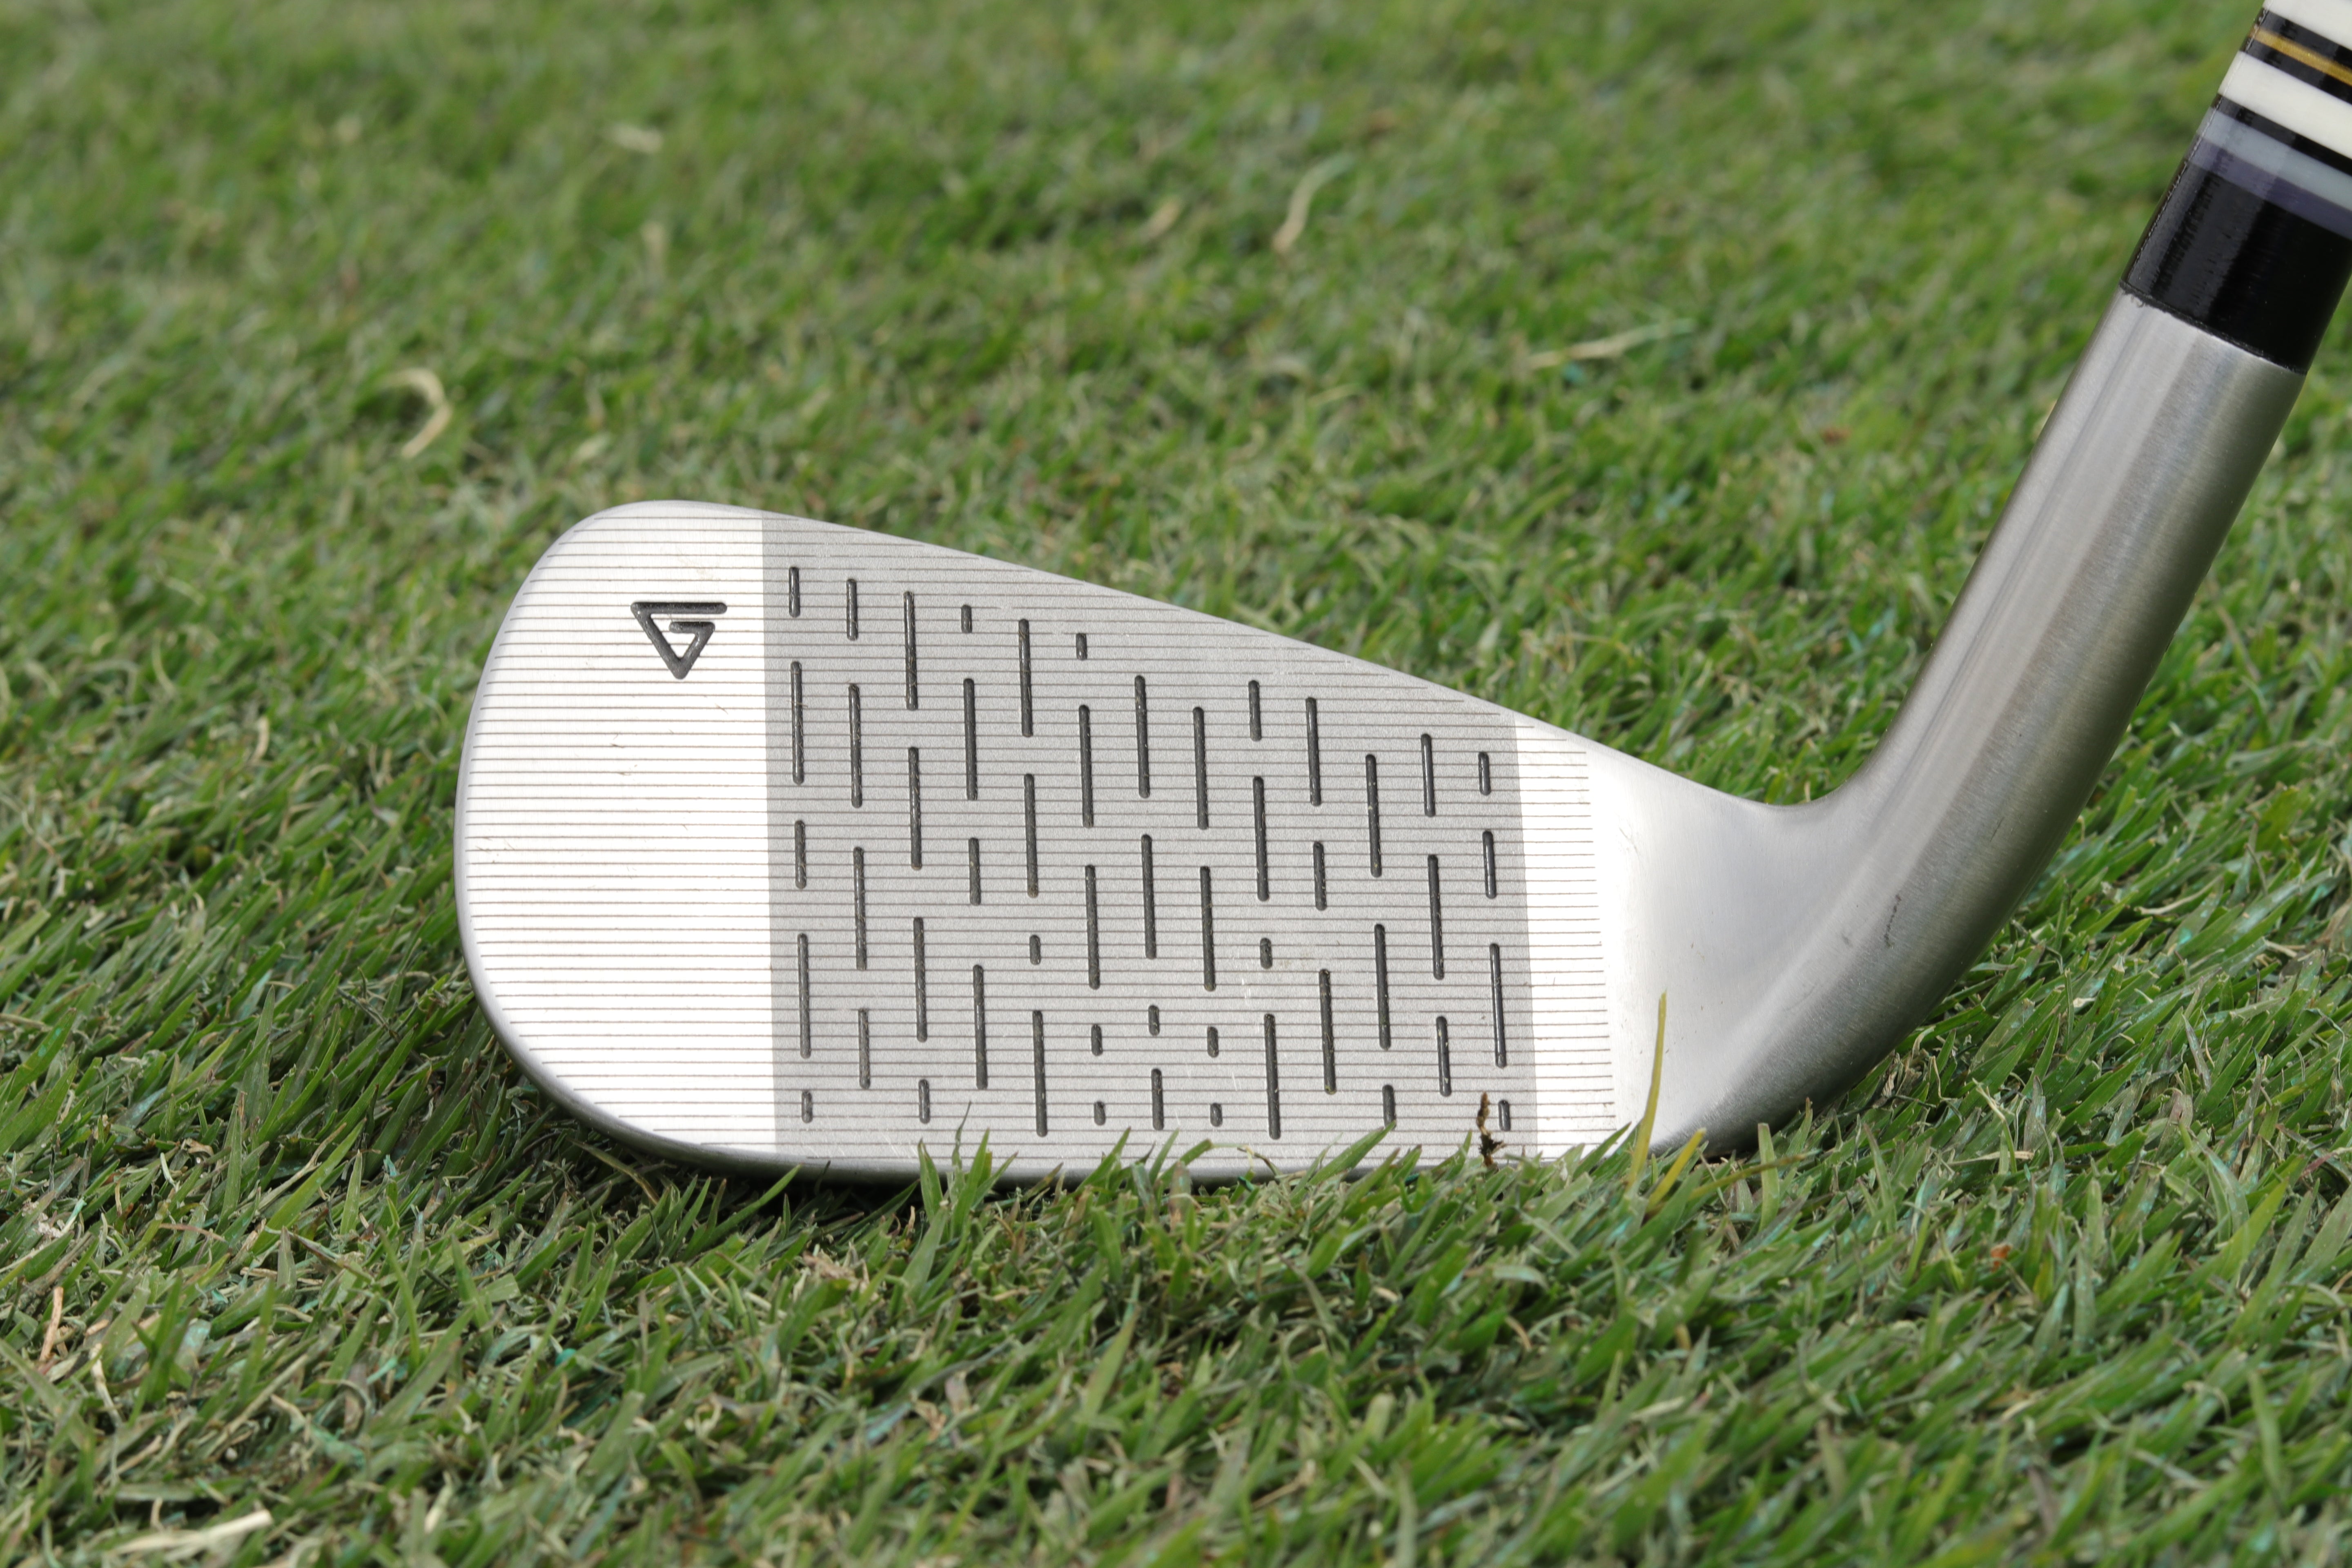 The Vipper by Vertical Groove Golf (VGG)